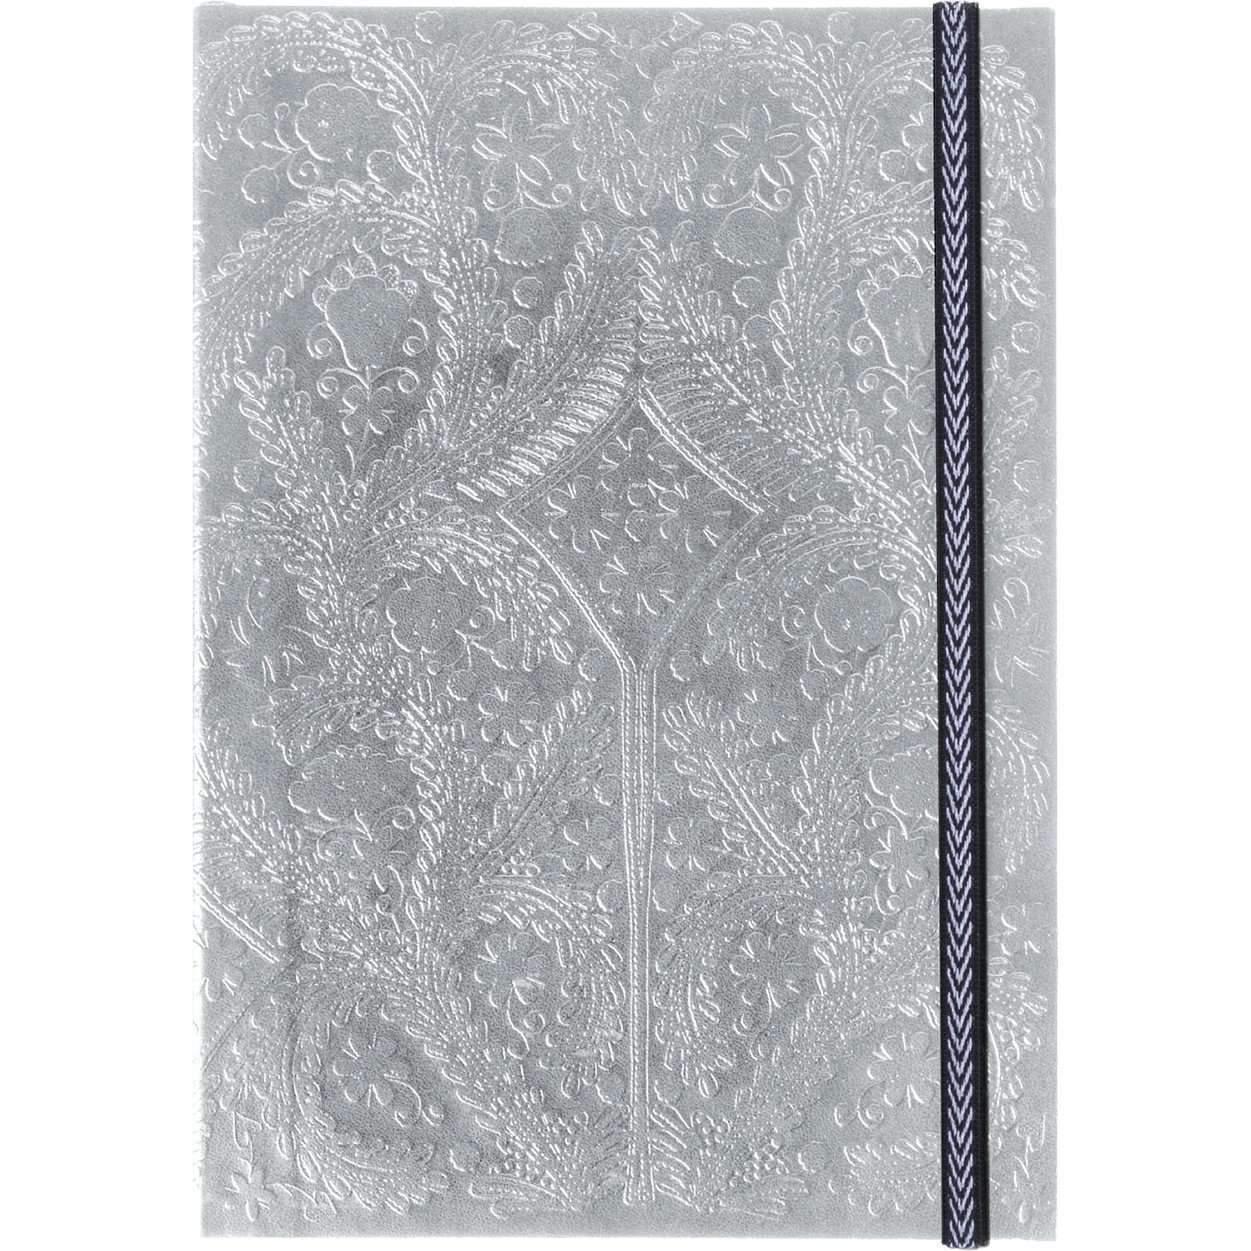 Silver Embossed Paseo Notebook - MAIA HOMES